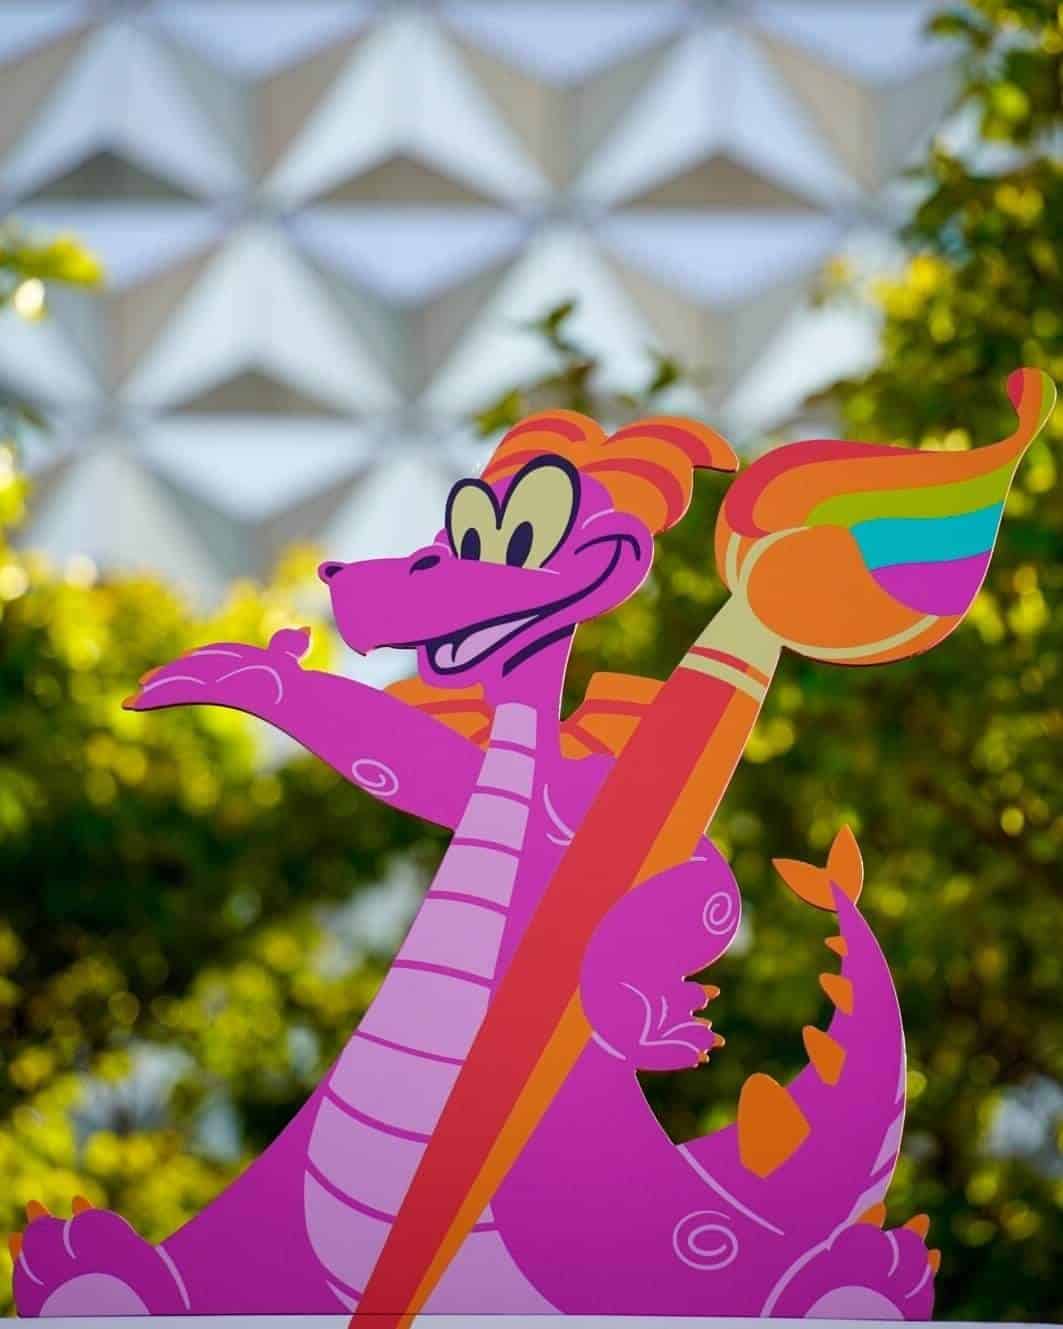 Figment is the mascot of the Festival of the Arts in EPCOT